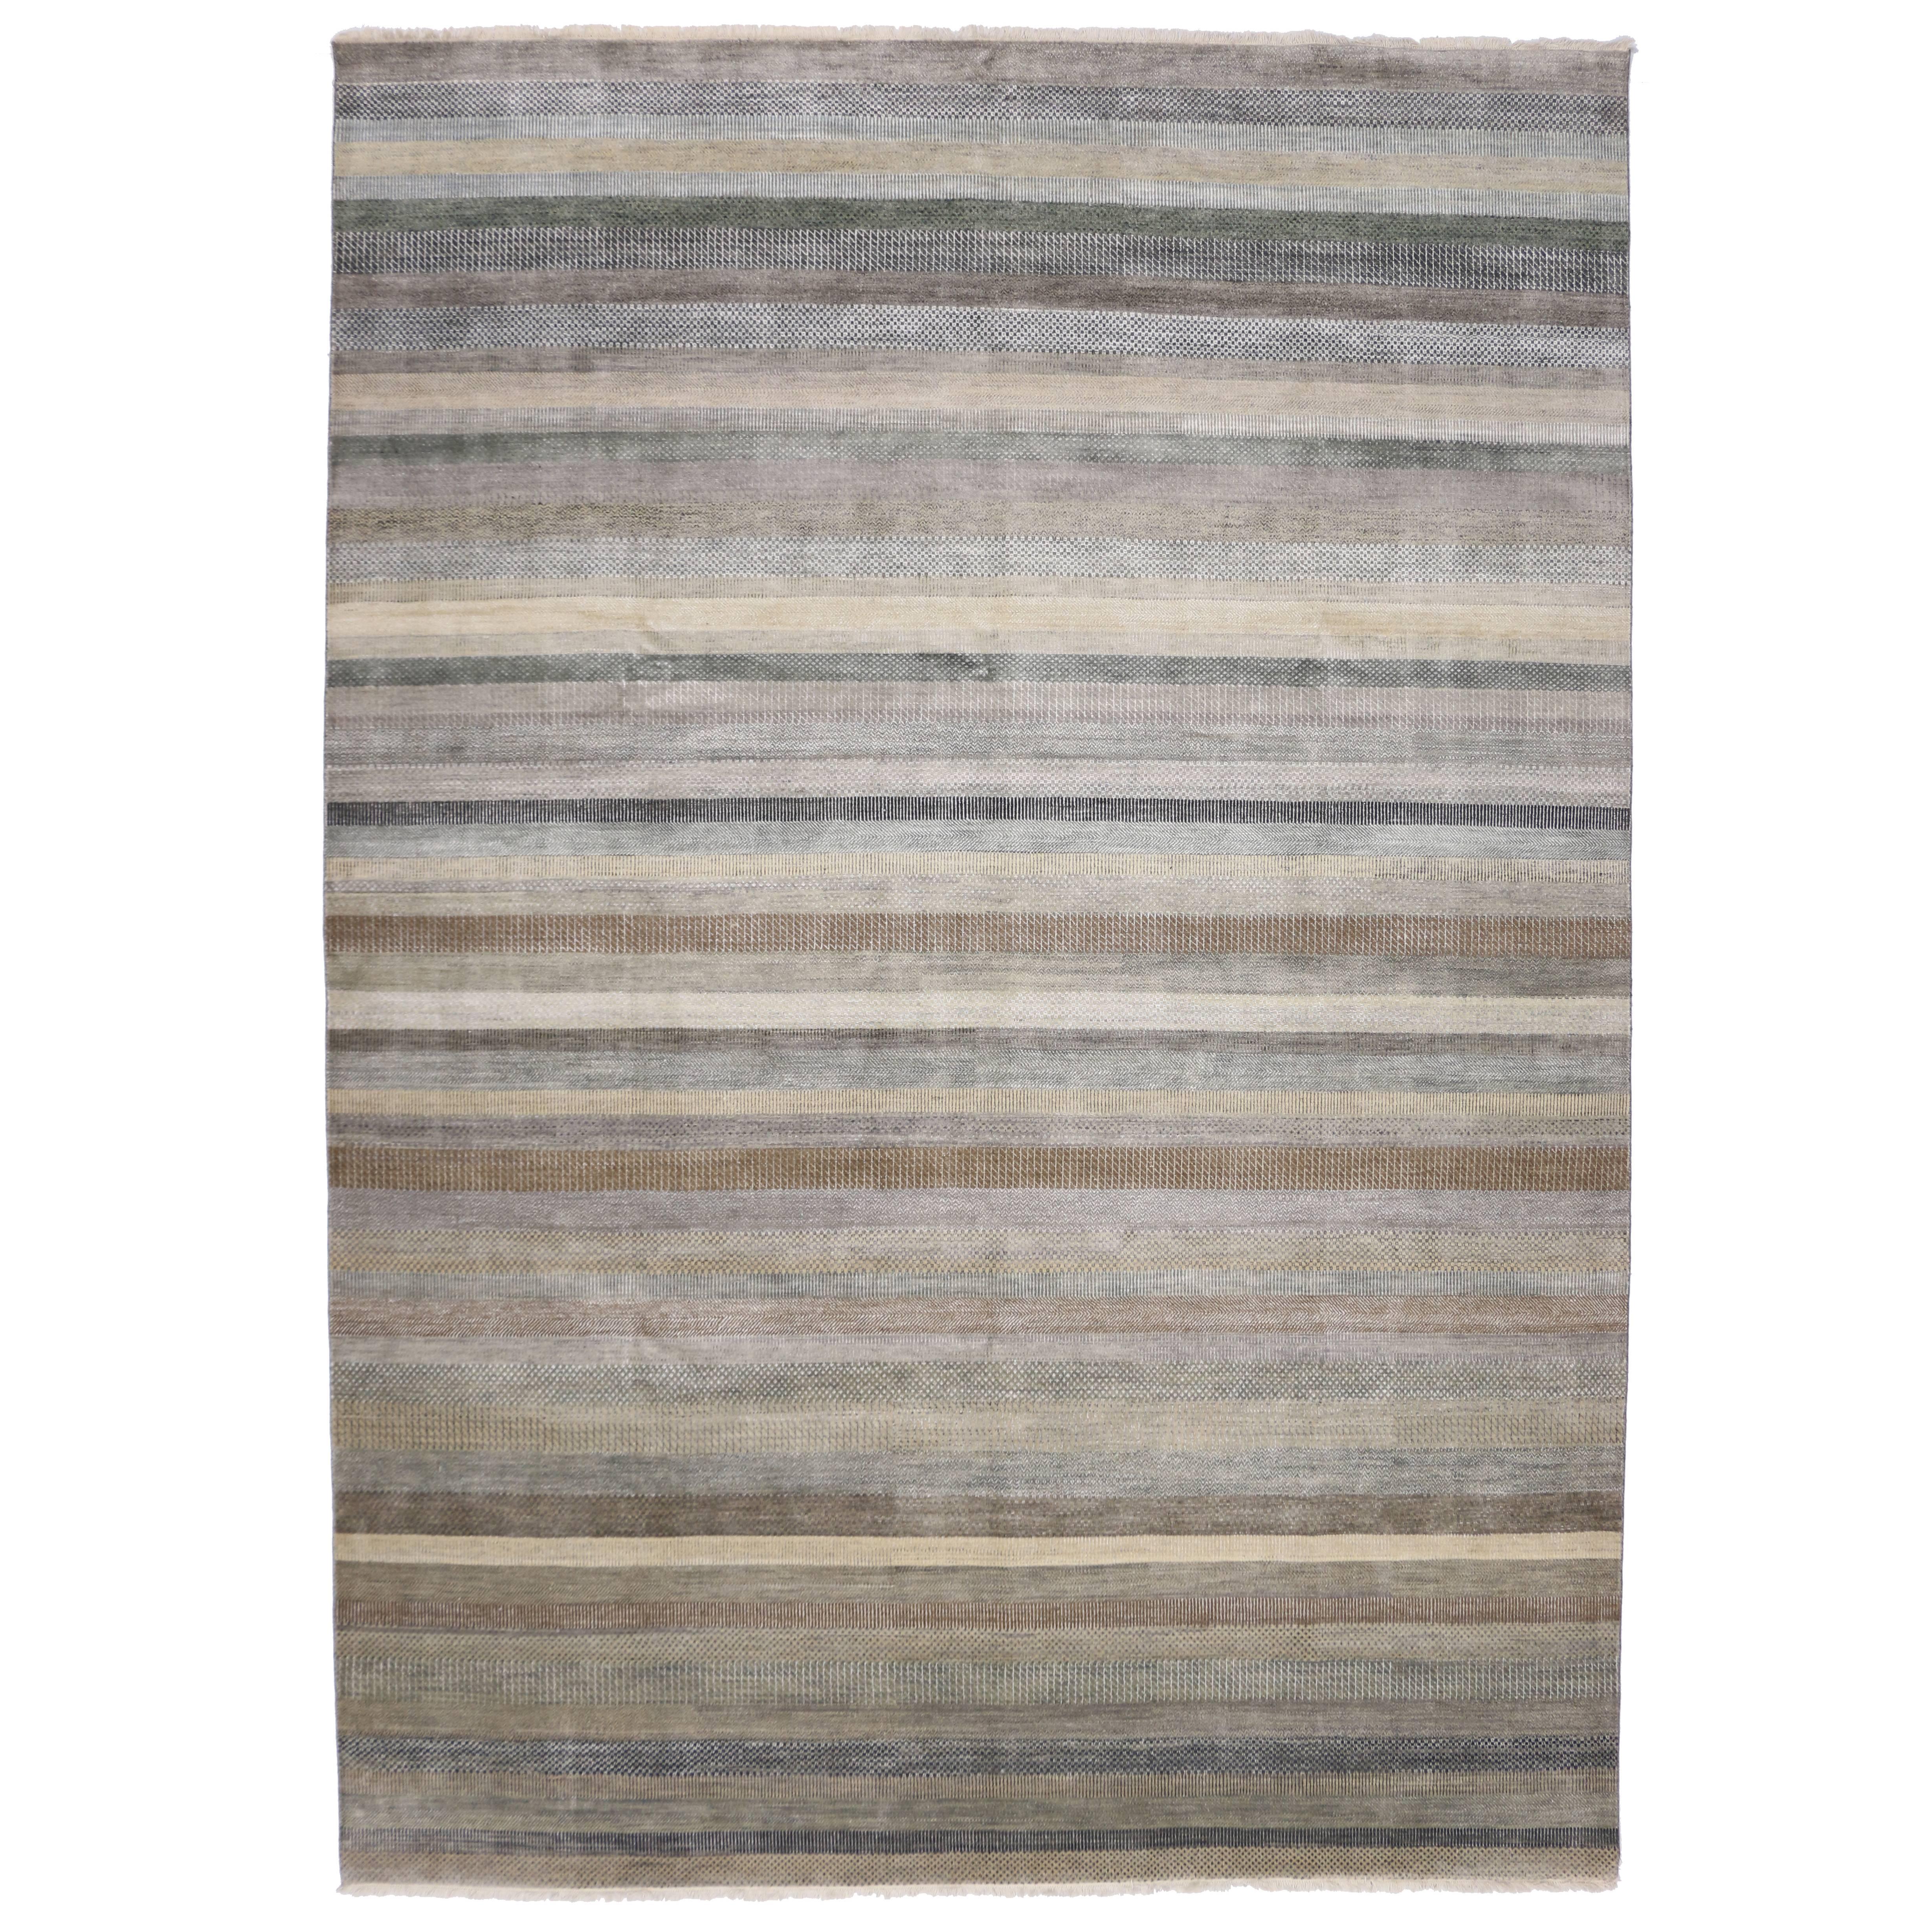 Transitional Indian Striped Area Rug with Modern Cottage Style and Bucolic Charm